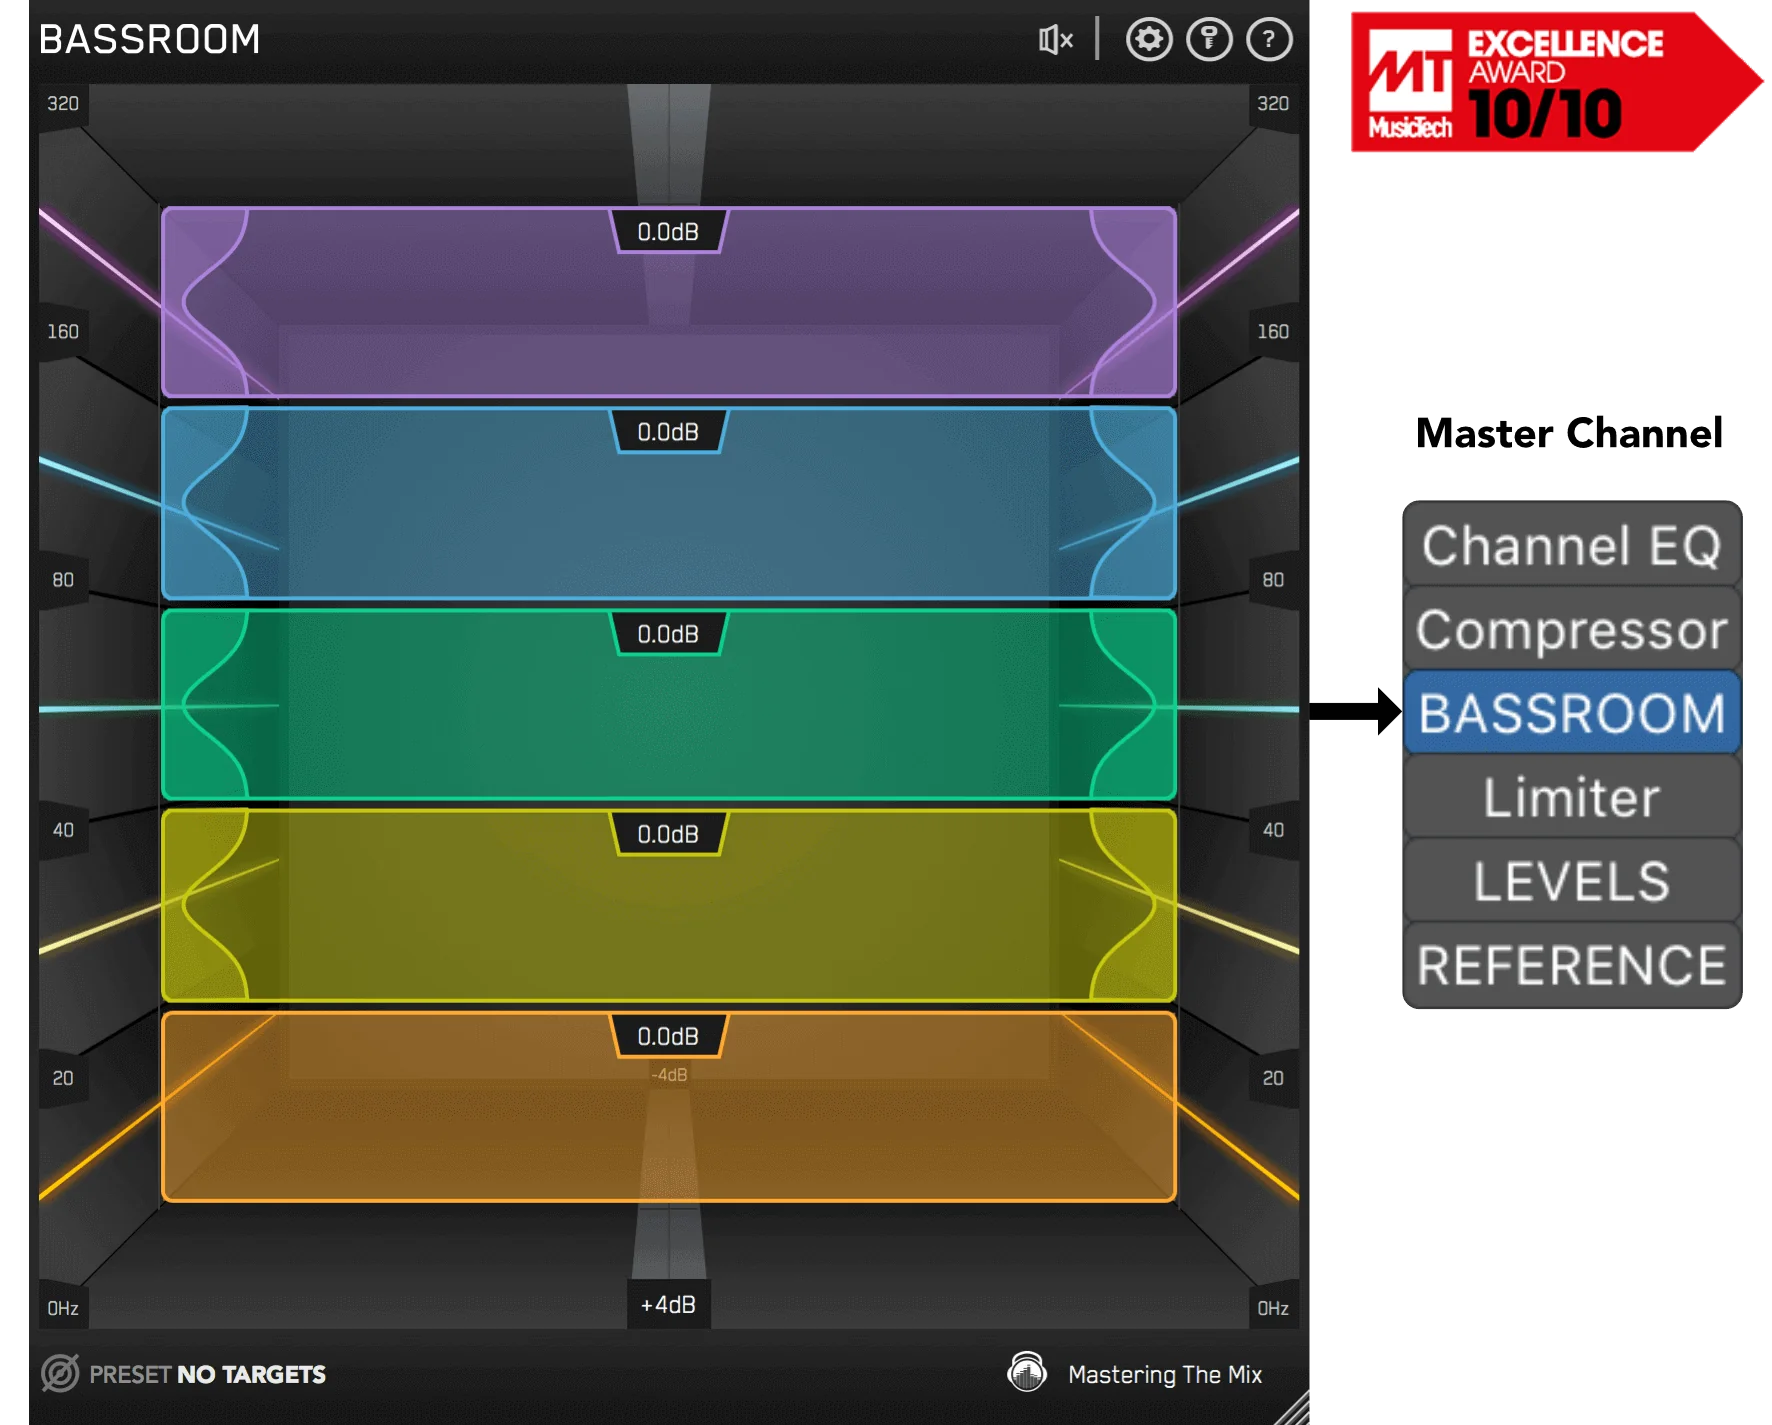 BASSROOM on the master channel